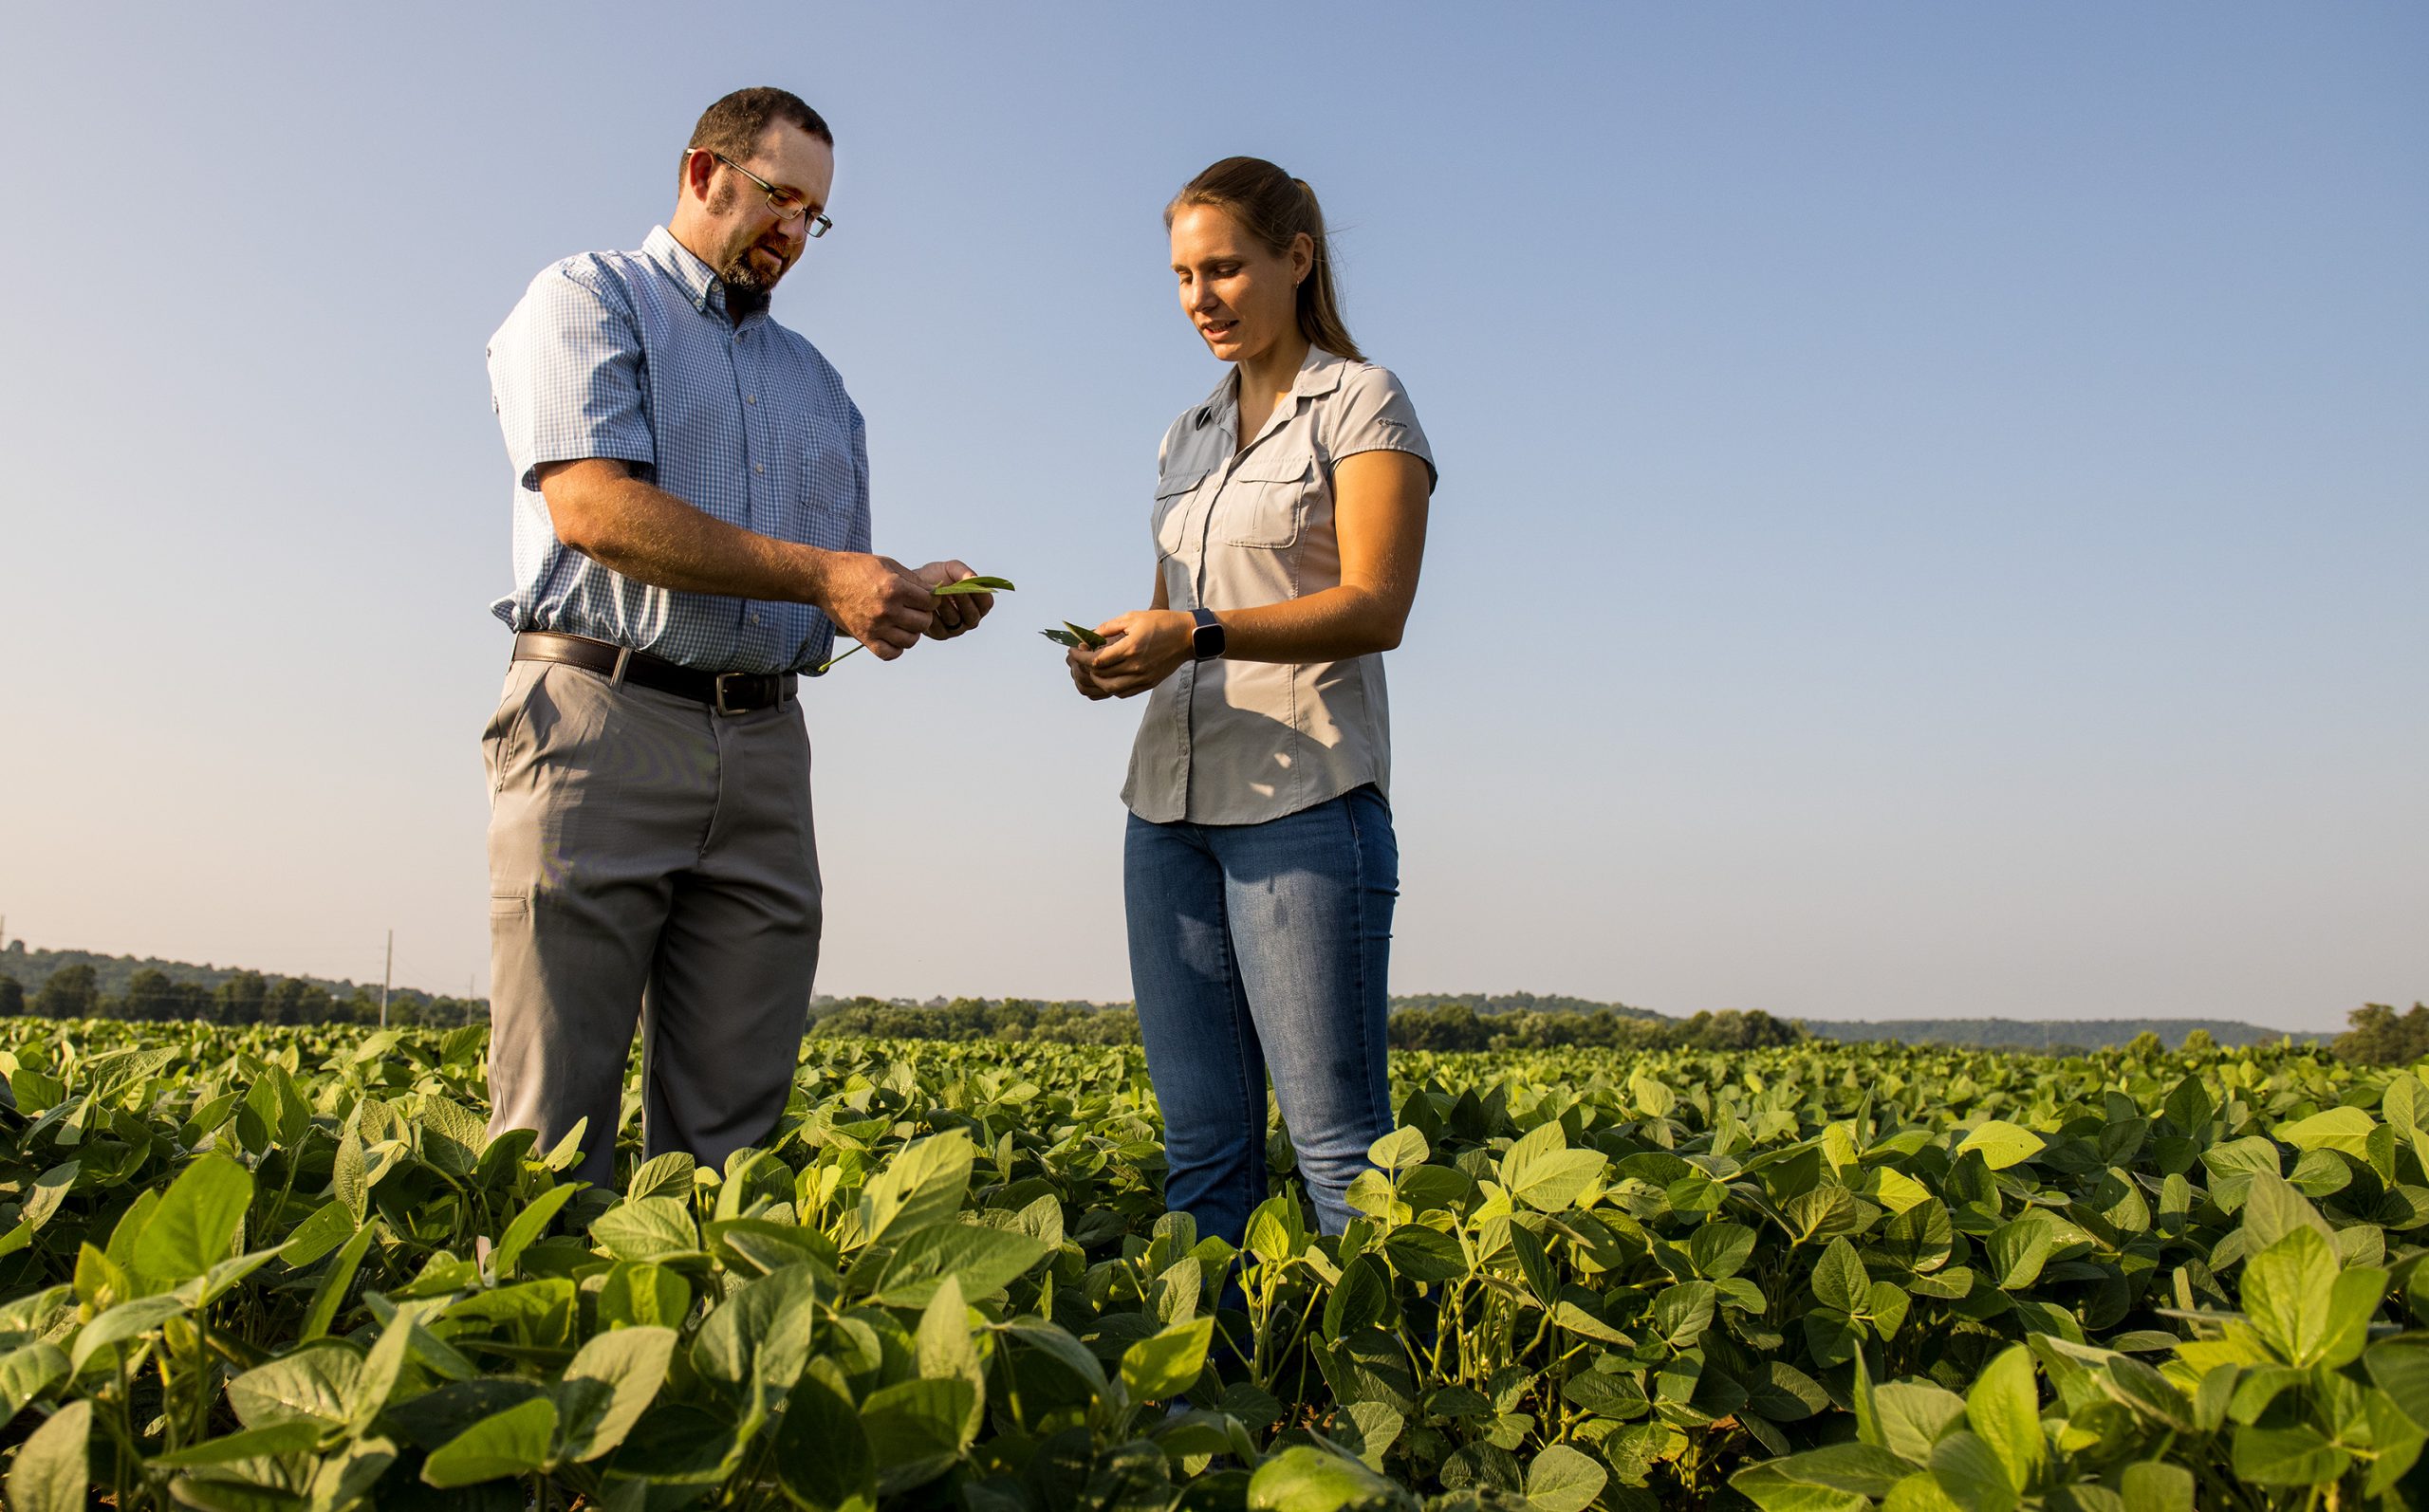 Trent Roberts, associate professor of soil fertility and soil testing, and senior graduate assistant Carrie Ortel, examine soybean plants for signs of nutrient deficiency. (Photo by Fred Miller, U of A System Division of Agriculture.)